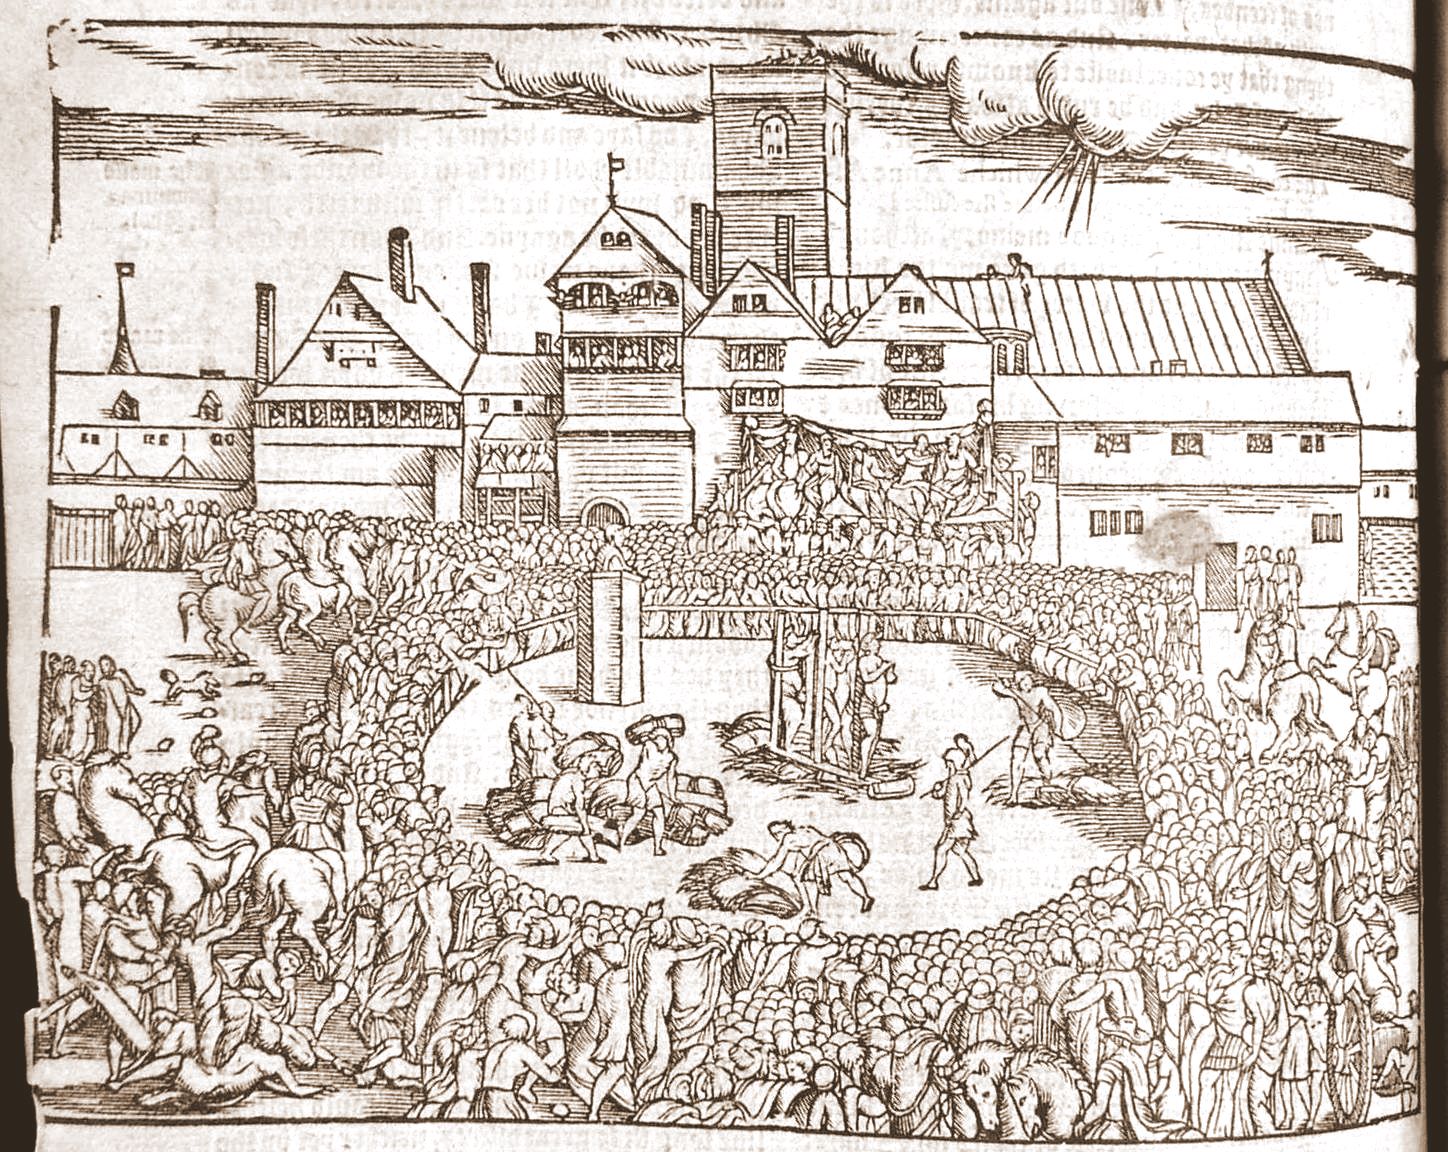 The Execution of Anne Askew